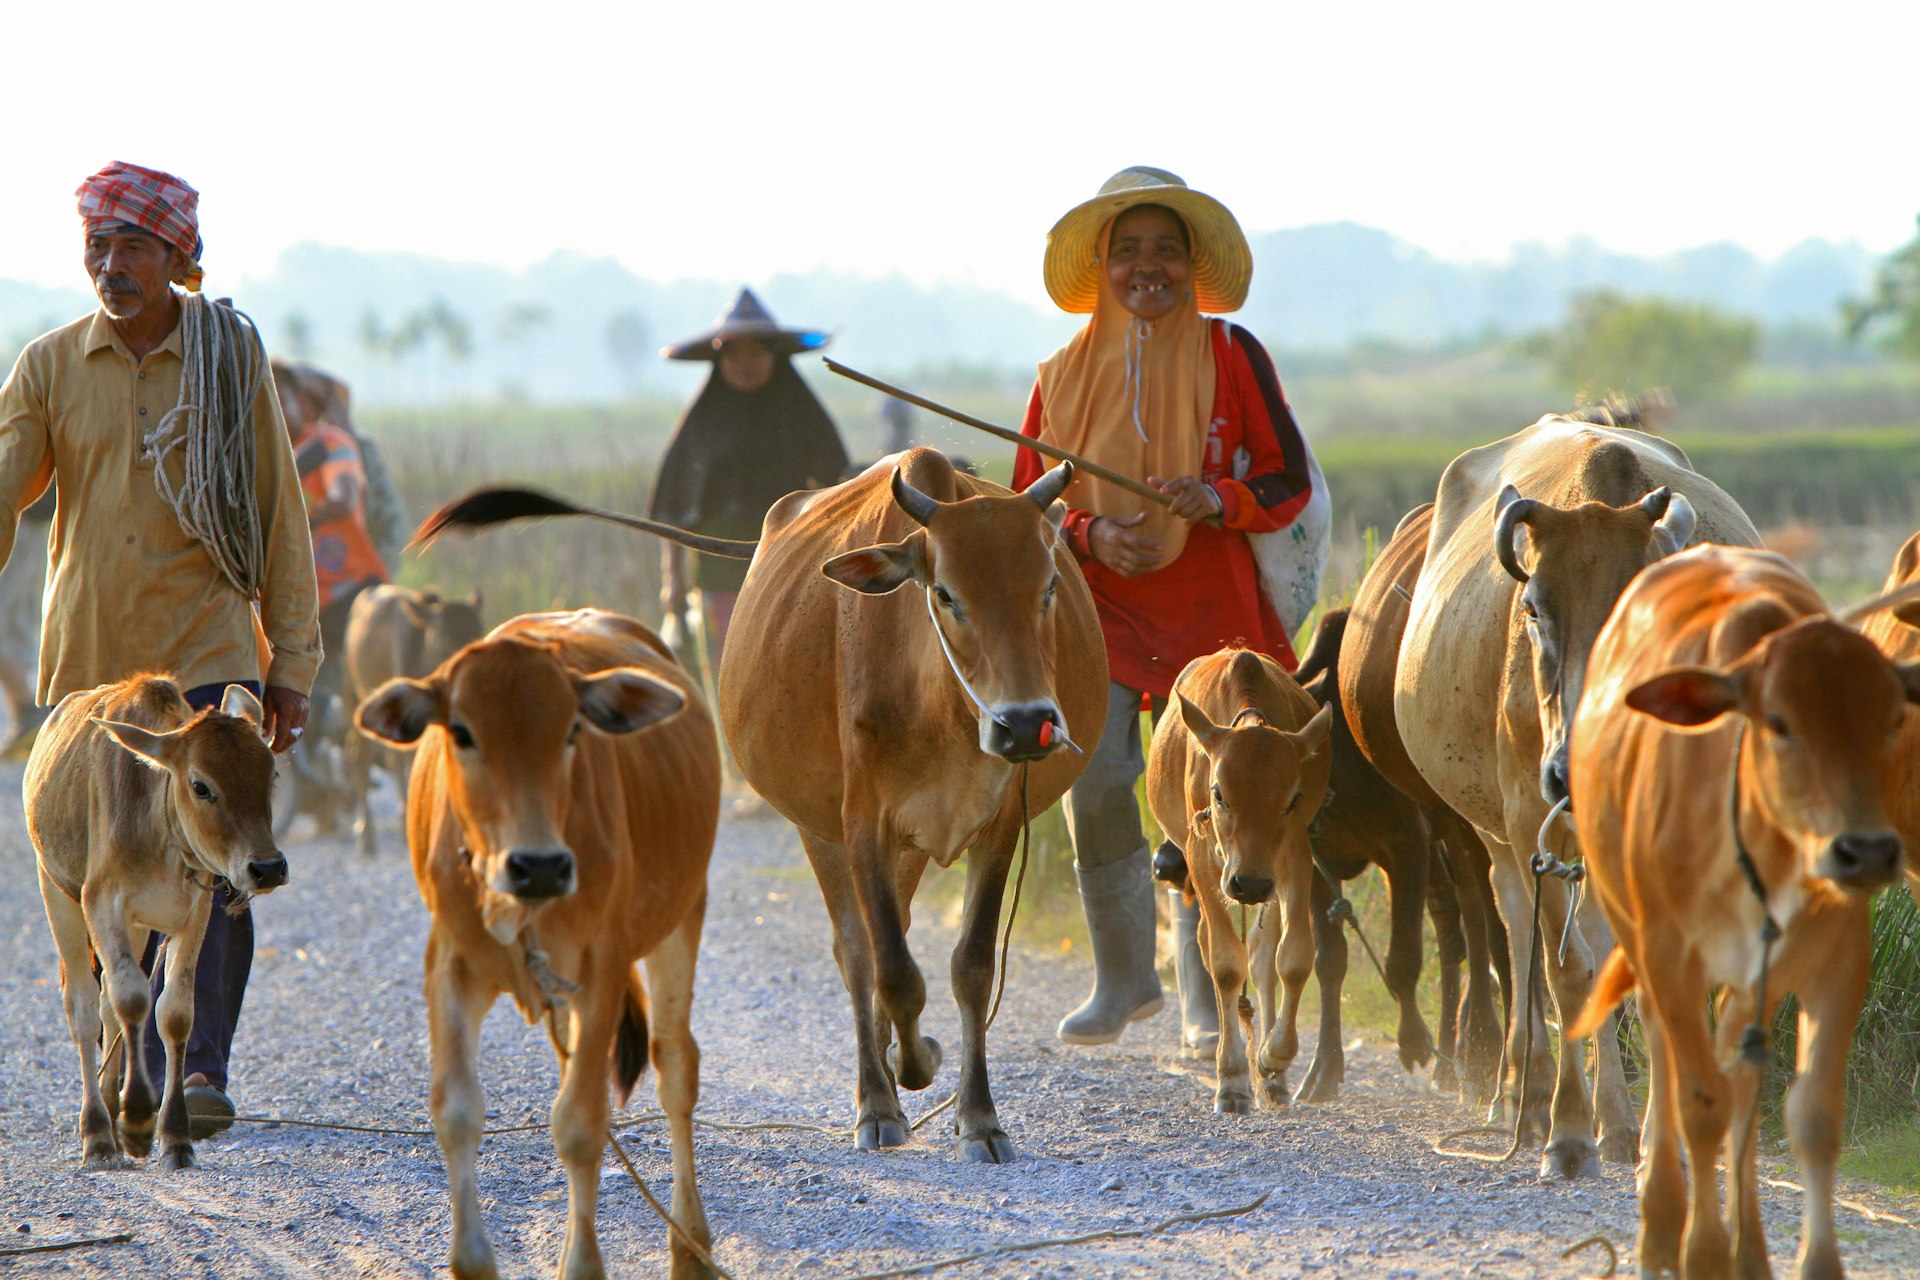 Cattle drivers lead their herds back to the corral in Nakhon Si Thammarat, Thailand